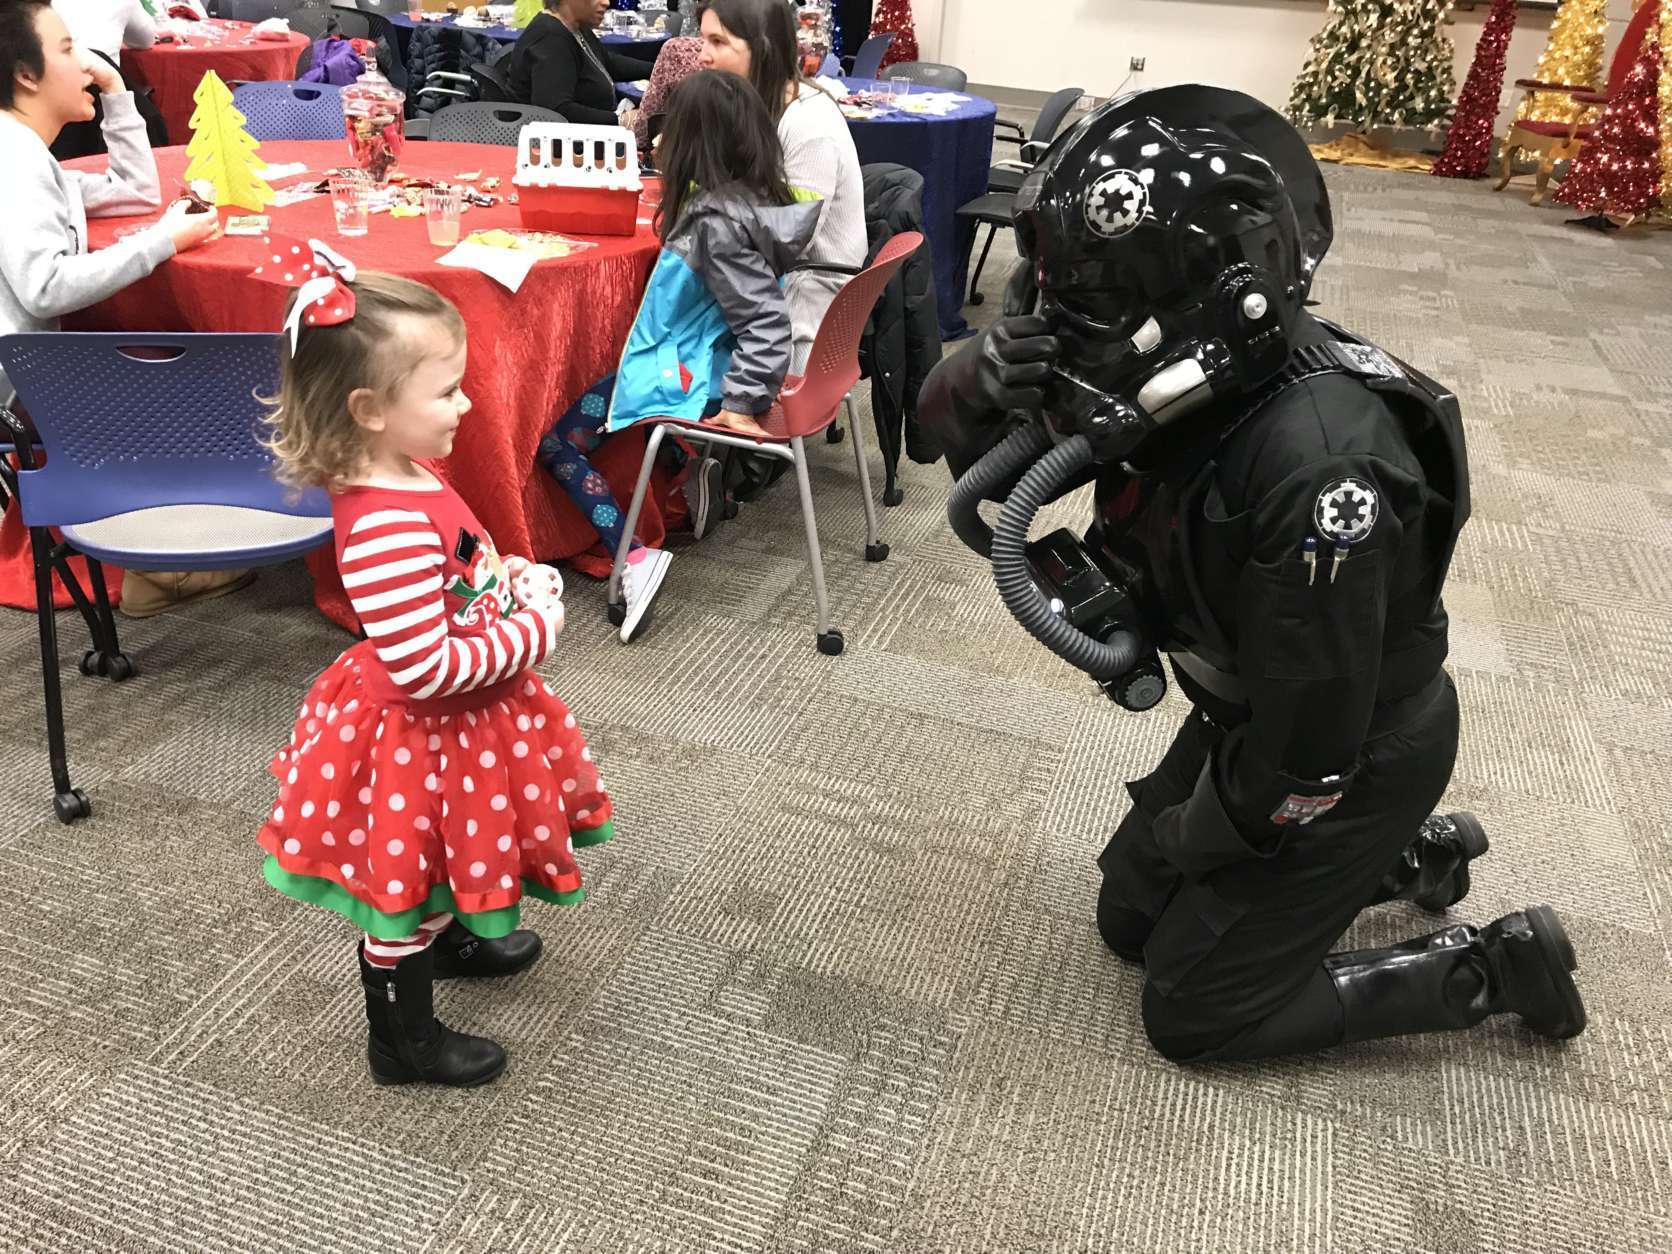 A TIE fighter pilot plays peekaboo with a little girl. He may look like bad guy, but he’s soft on the inside. (WTOP/Michelle Basch)